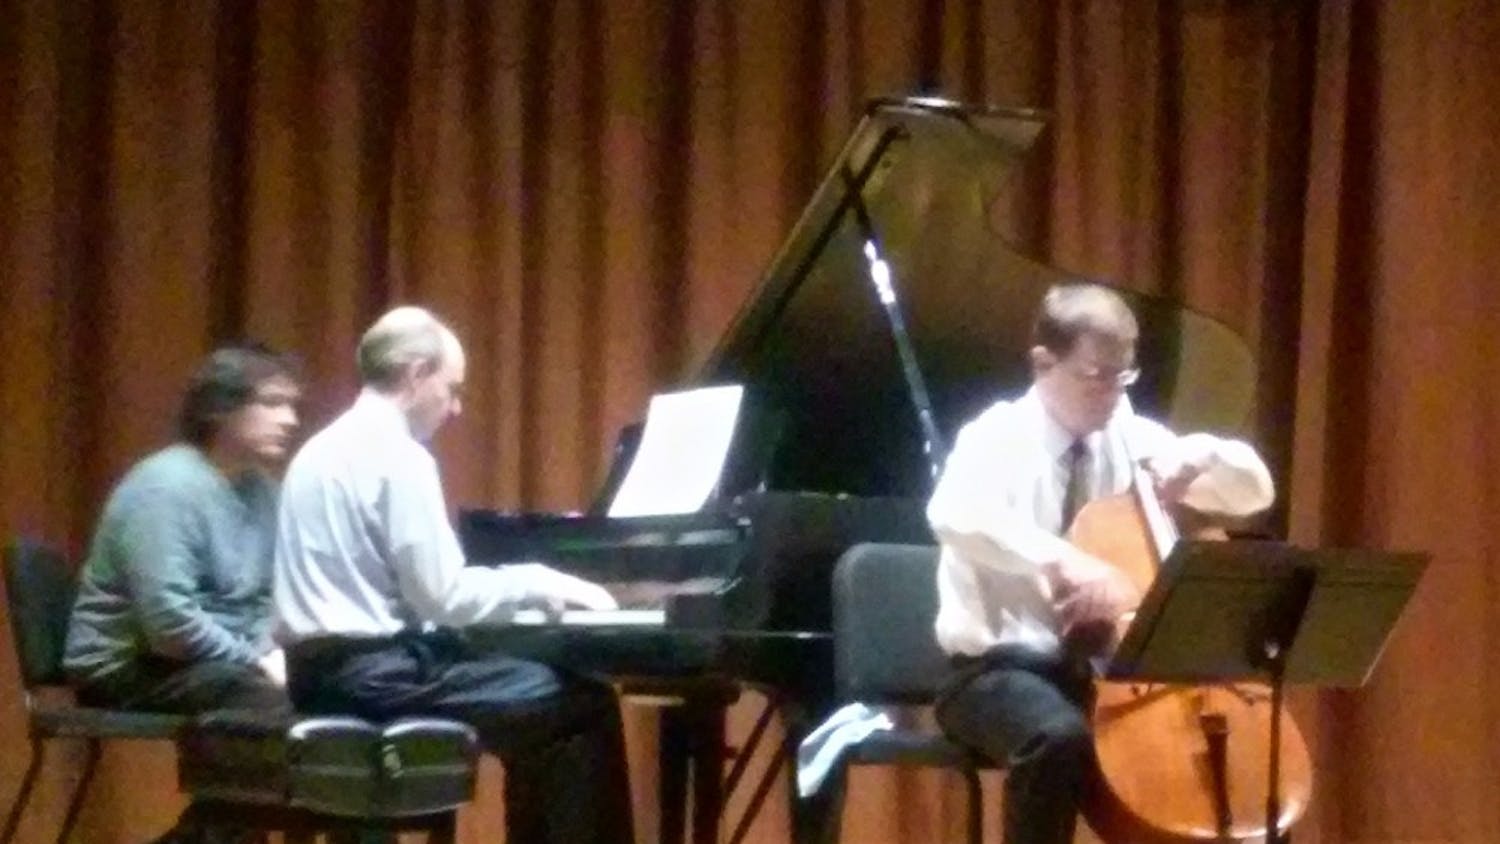 Guest cellist, Benjamin Whitcomb, and his accompanied pianist, Vincent DeVries, performed on&nbsp;Tuesday night in Alexander Recital Hall.